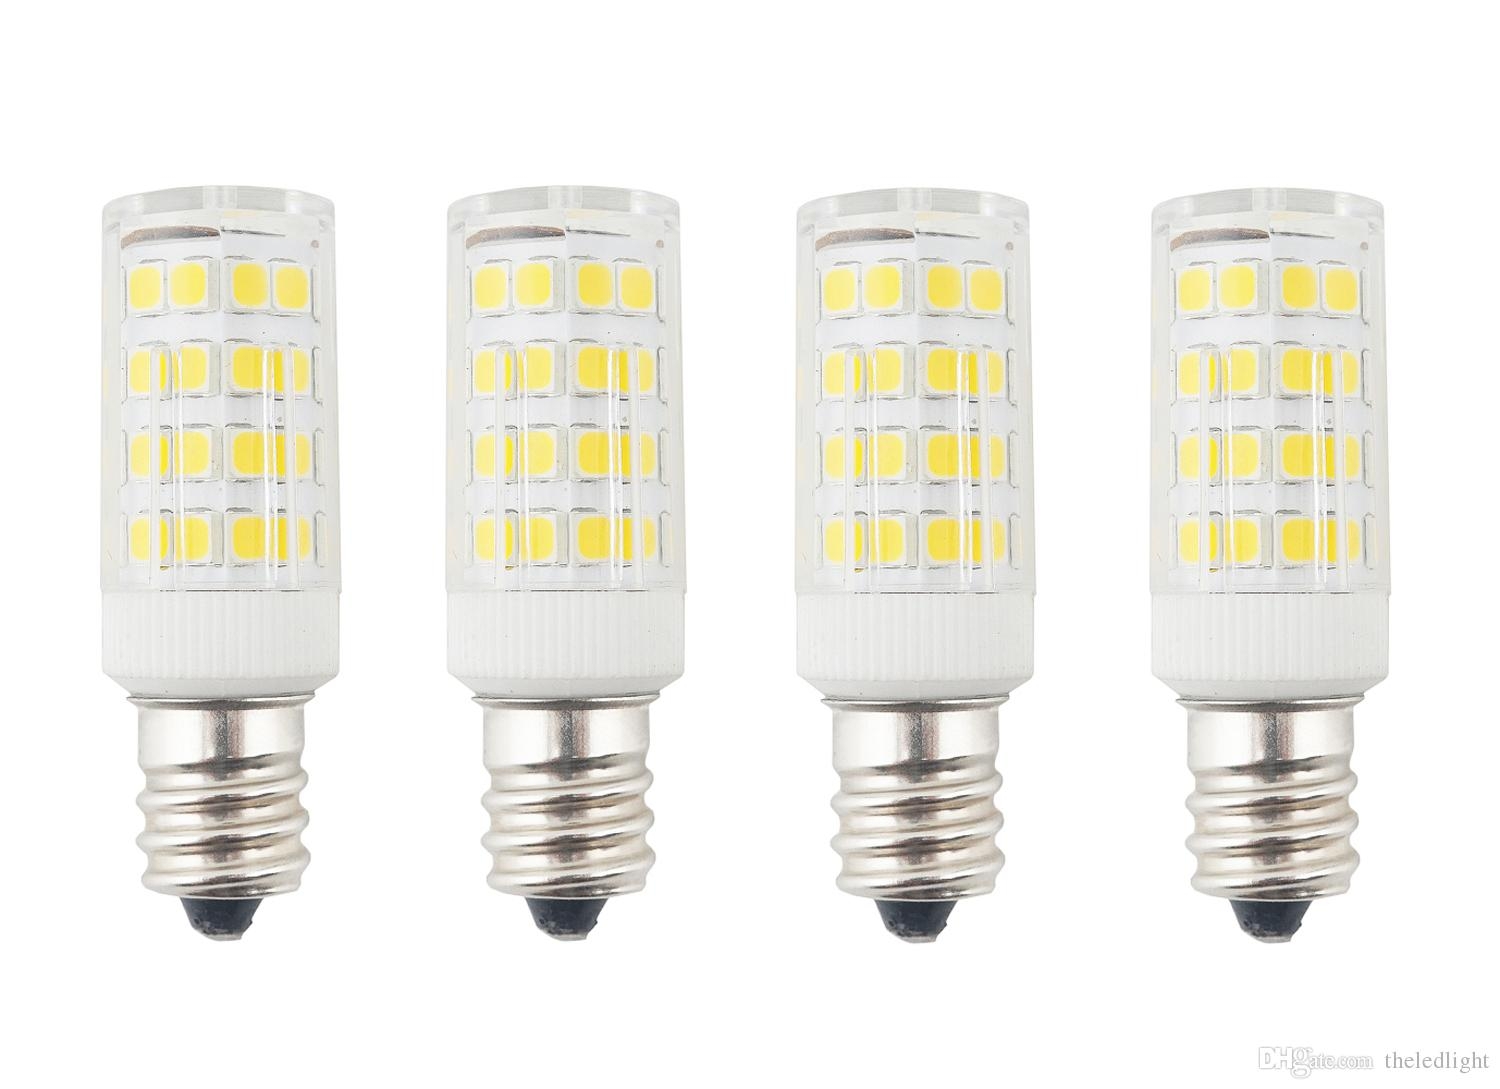 Permalink to Light Bulbs For Ceiling Fans